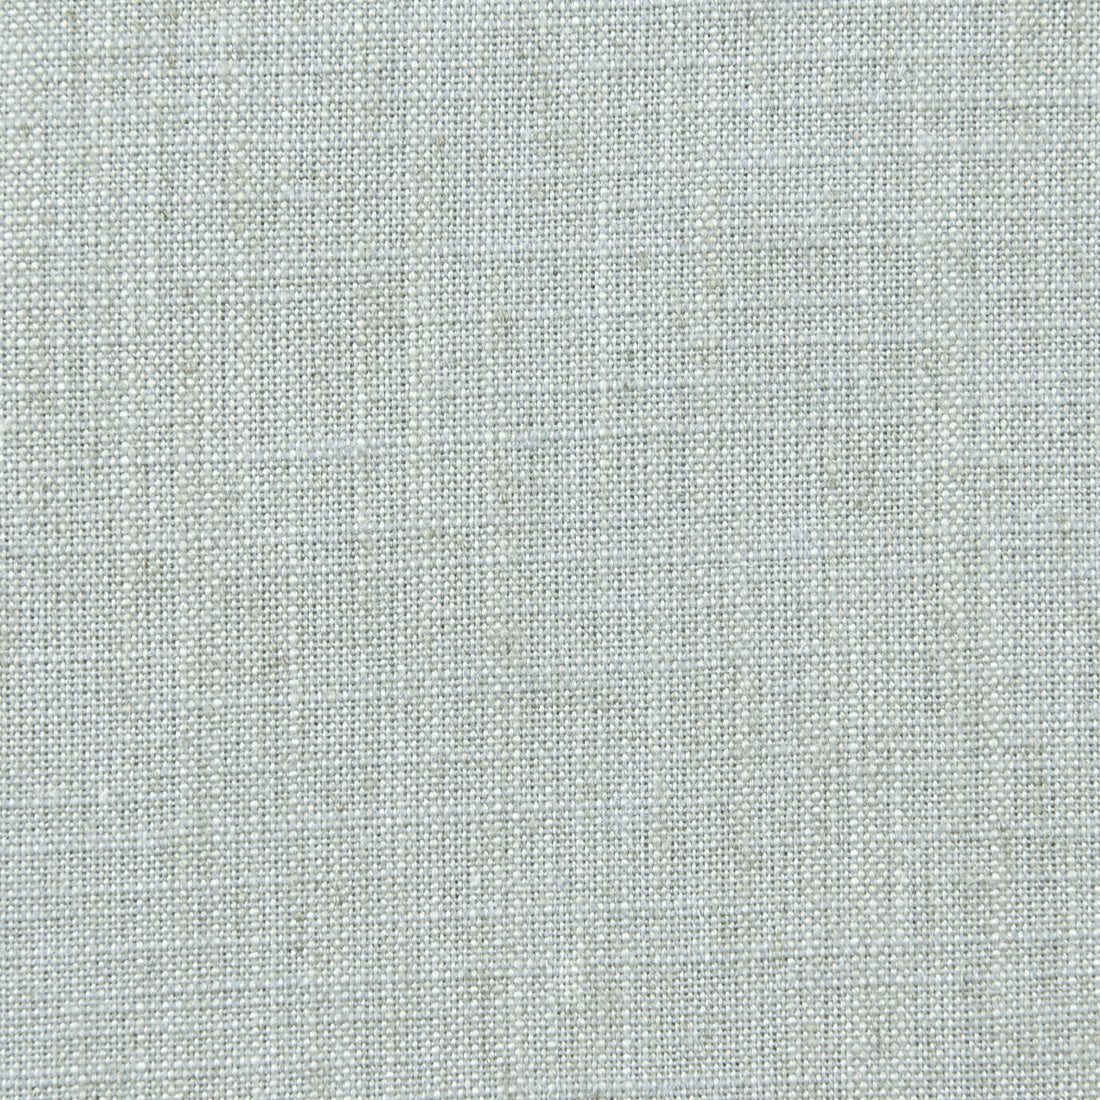 Biarritz fabric in seaspray color - pattern F0965/42.CAC.0 - by Clarke And Clarke in the Clarke &amp; Clarke Biarritz collection